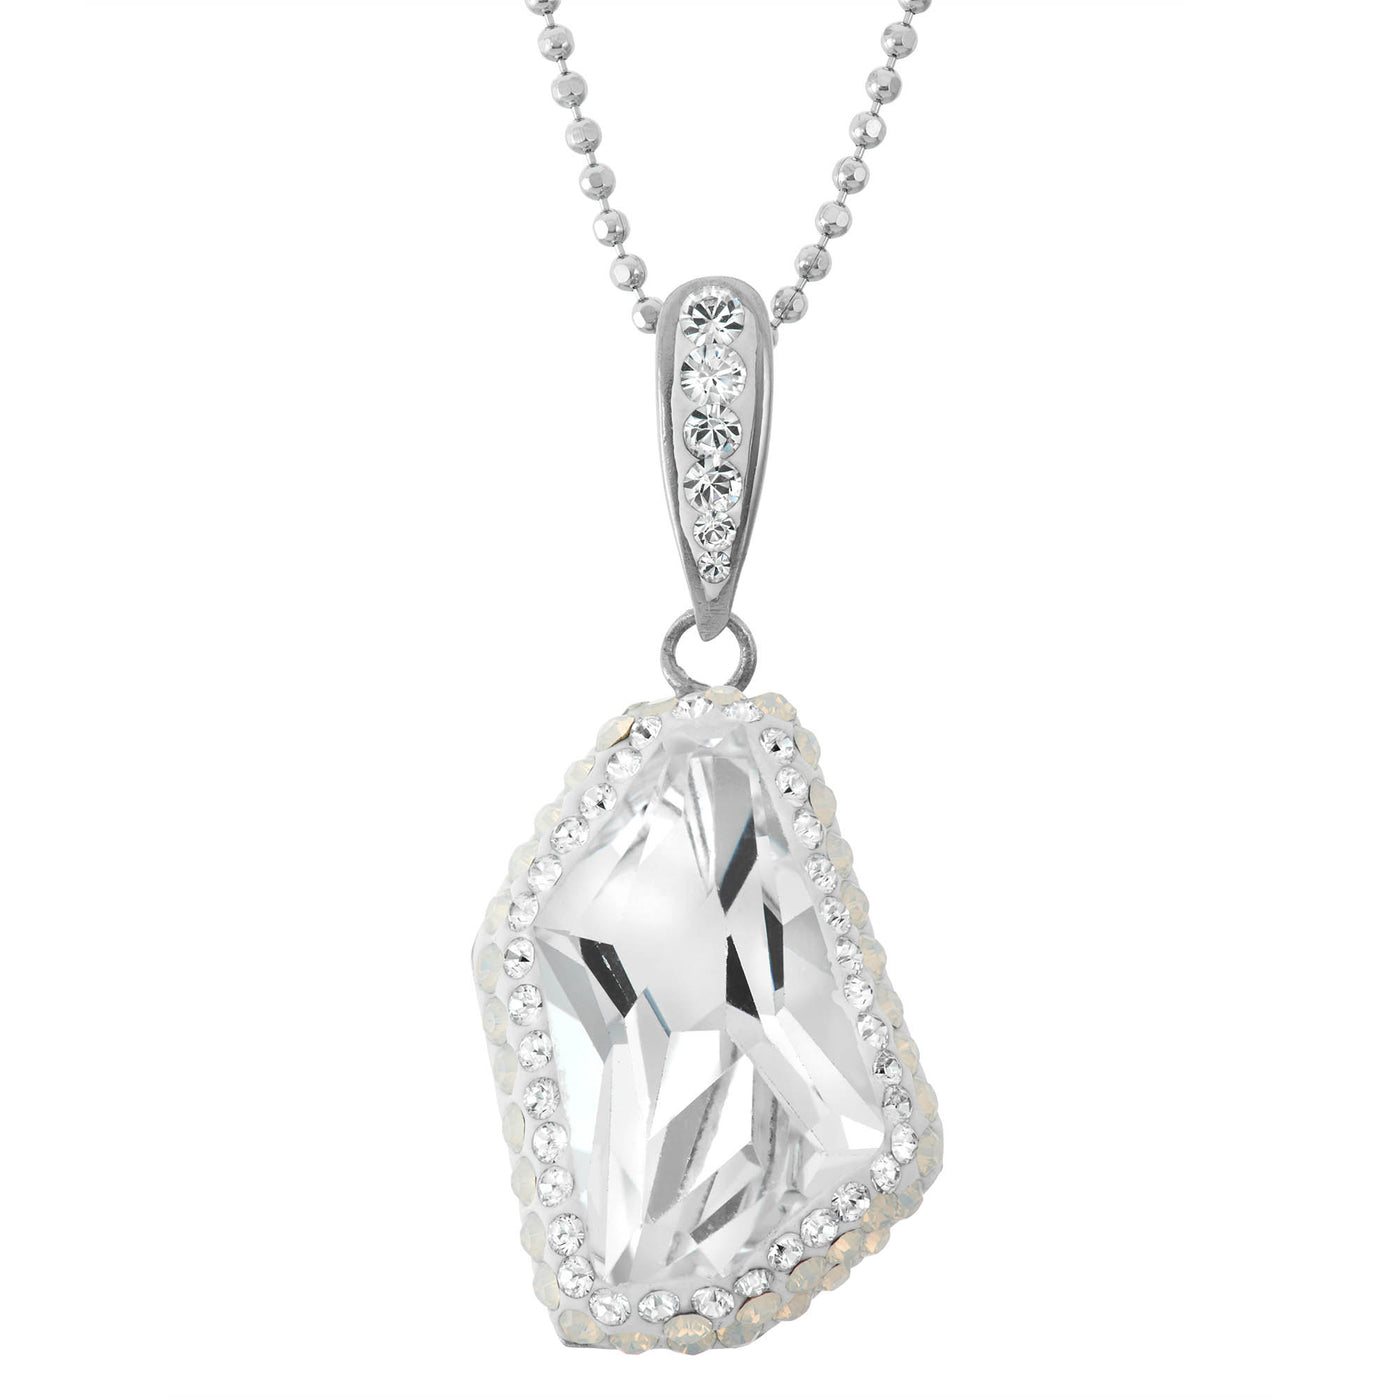 Rebecca Sloane Silver Asymmetrical Crystal With Pave Pendant